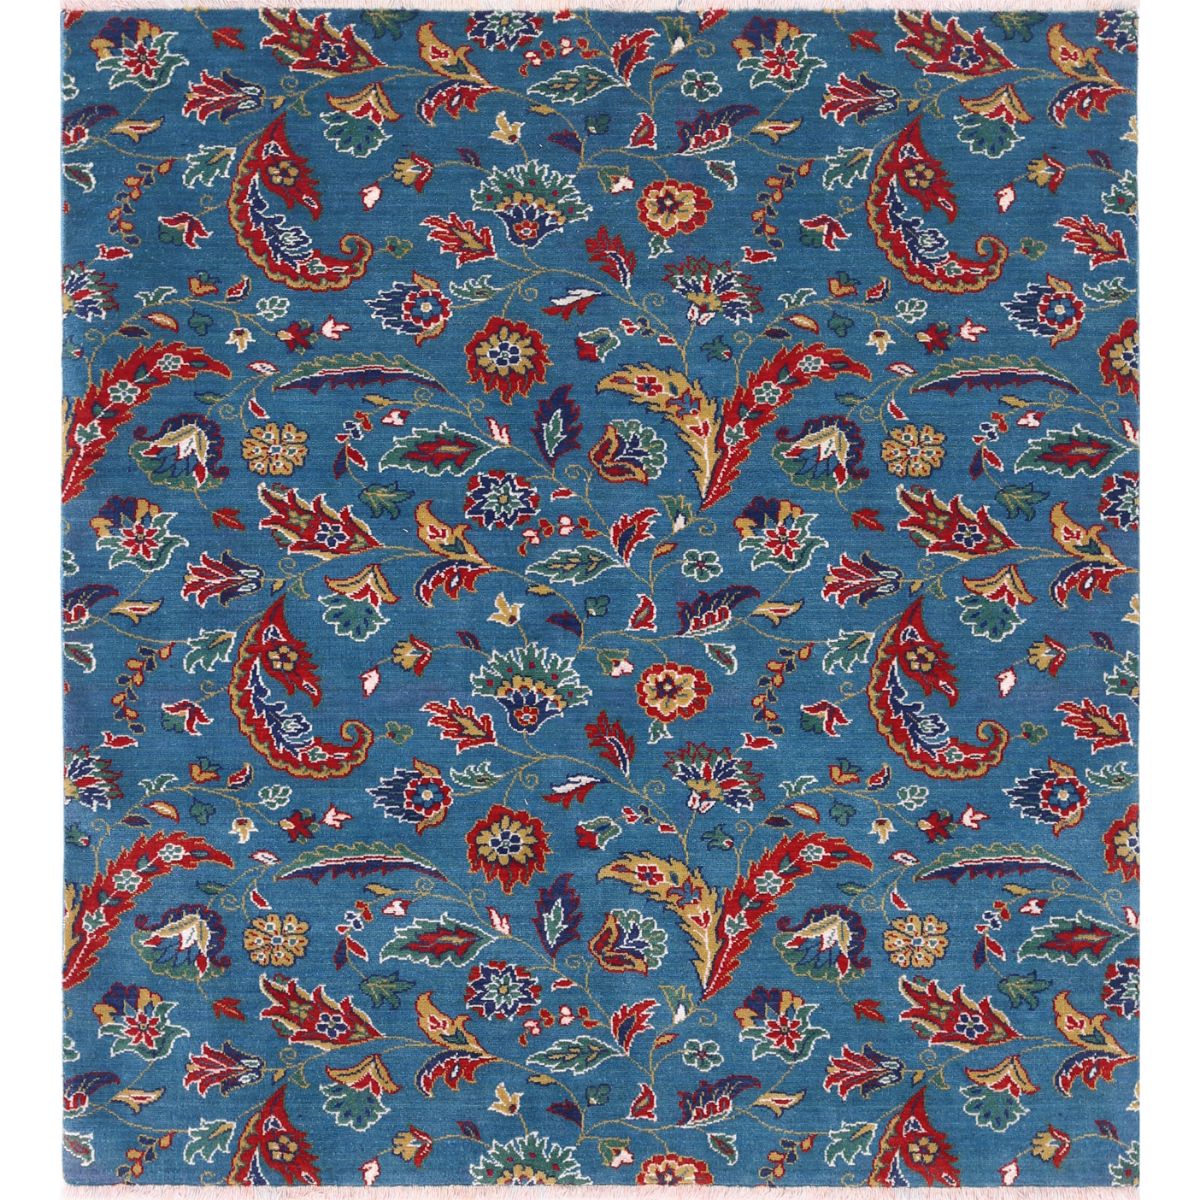 Gulshan Collection Powered Loomed Blue 4'2" X 4'8" Square Gulshan Design Wool Rug